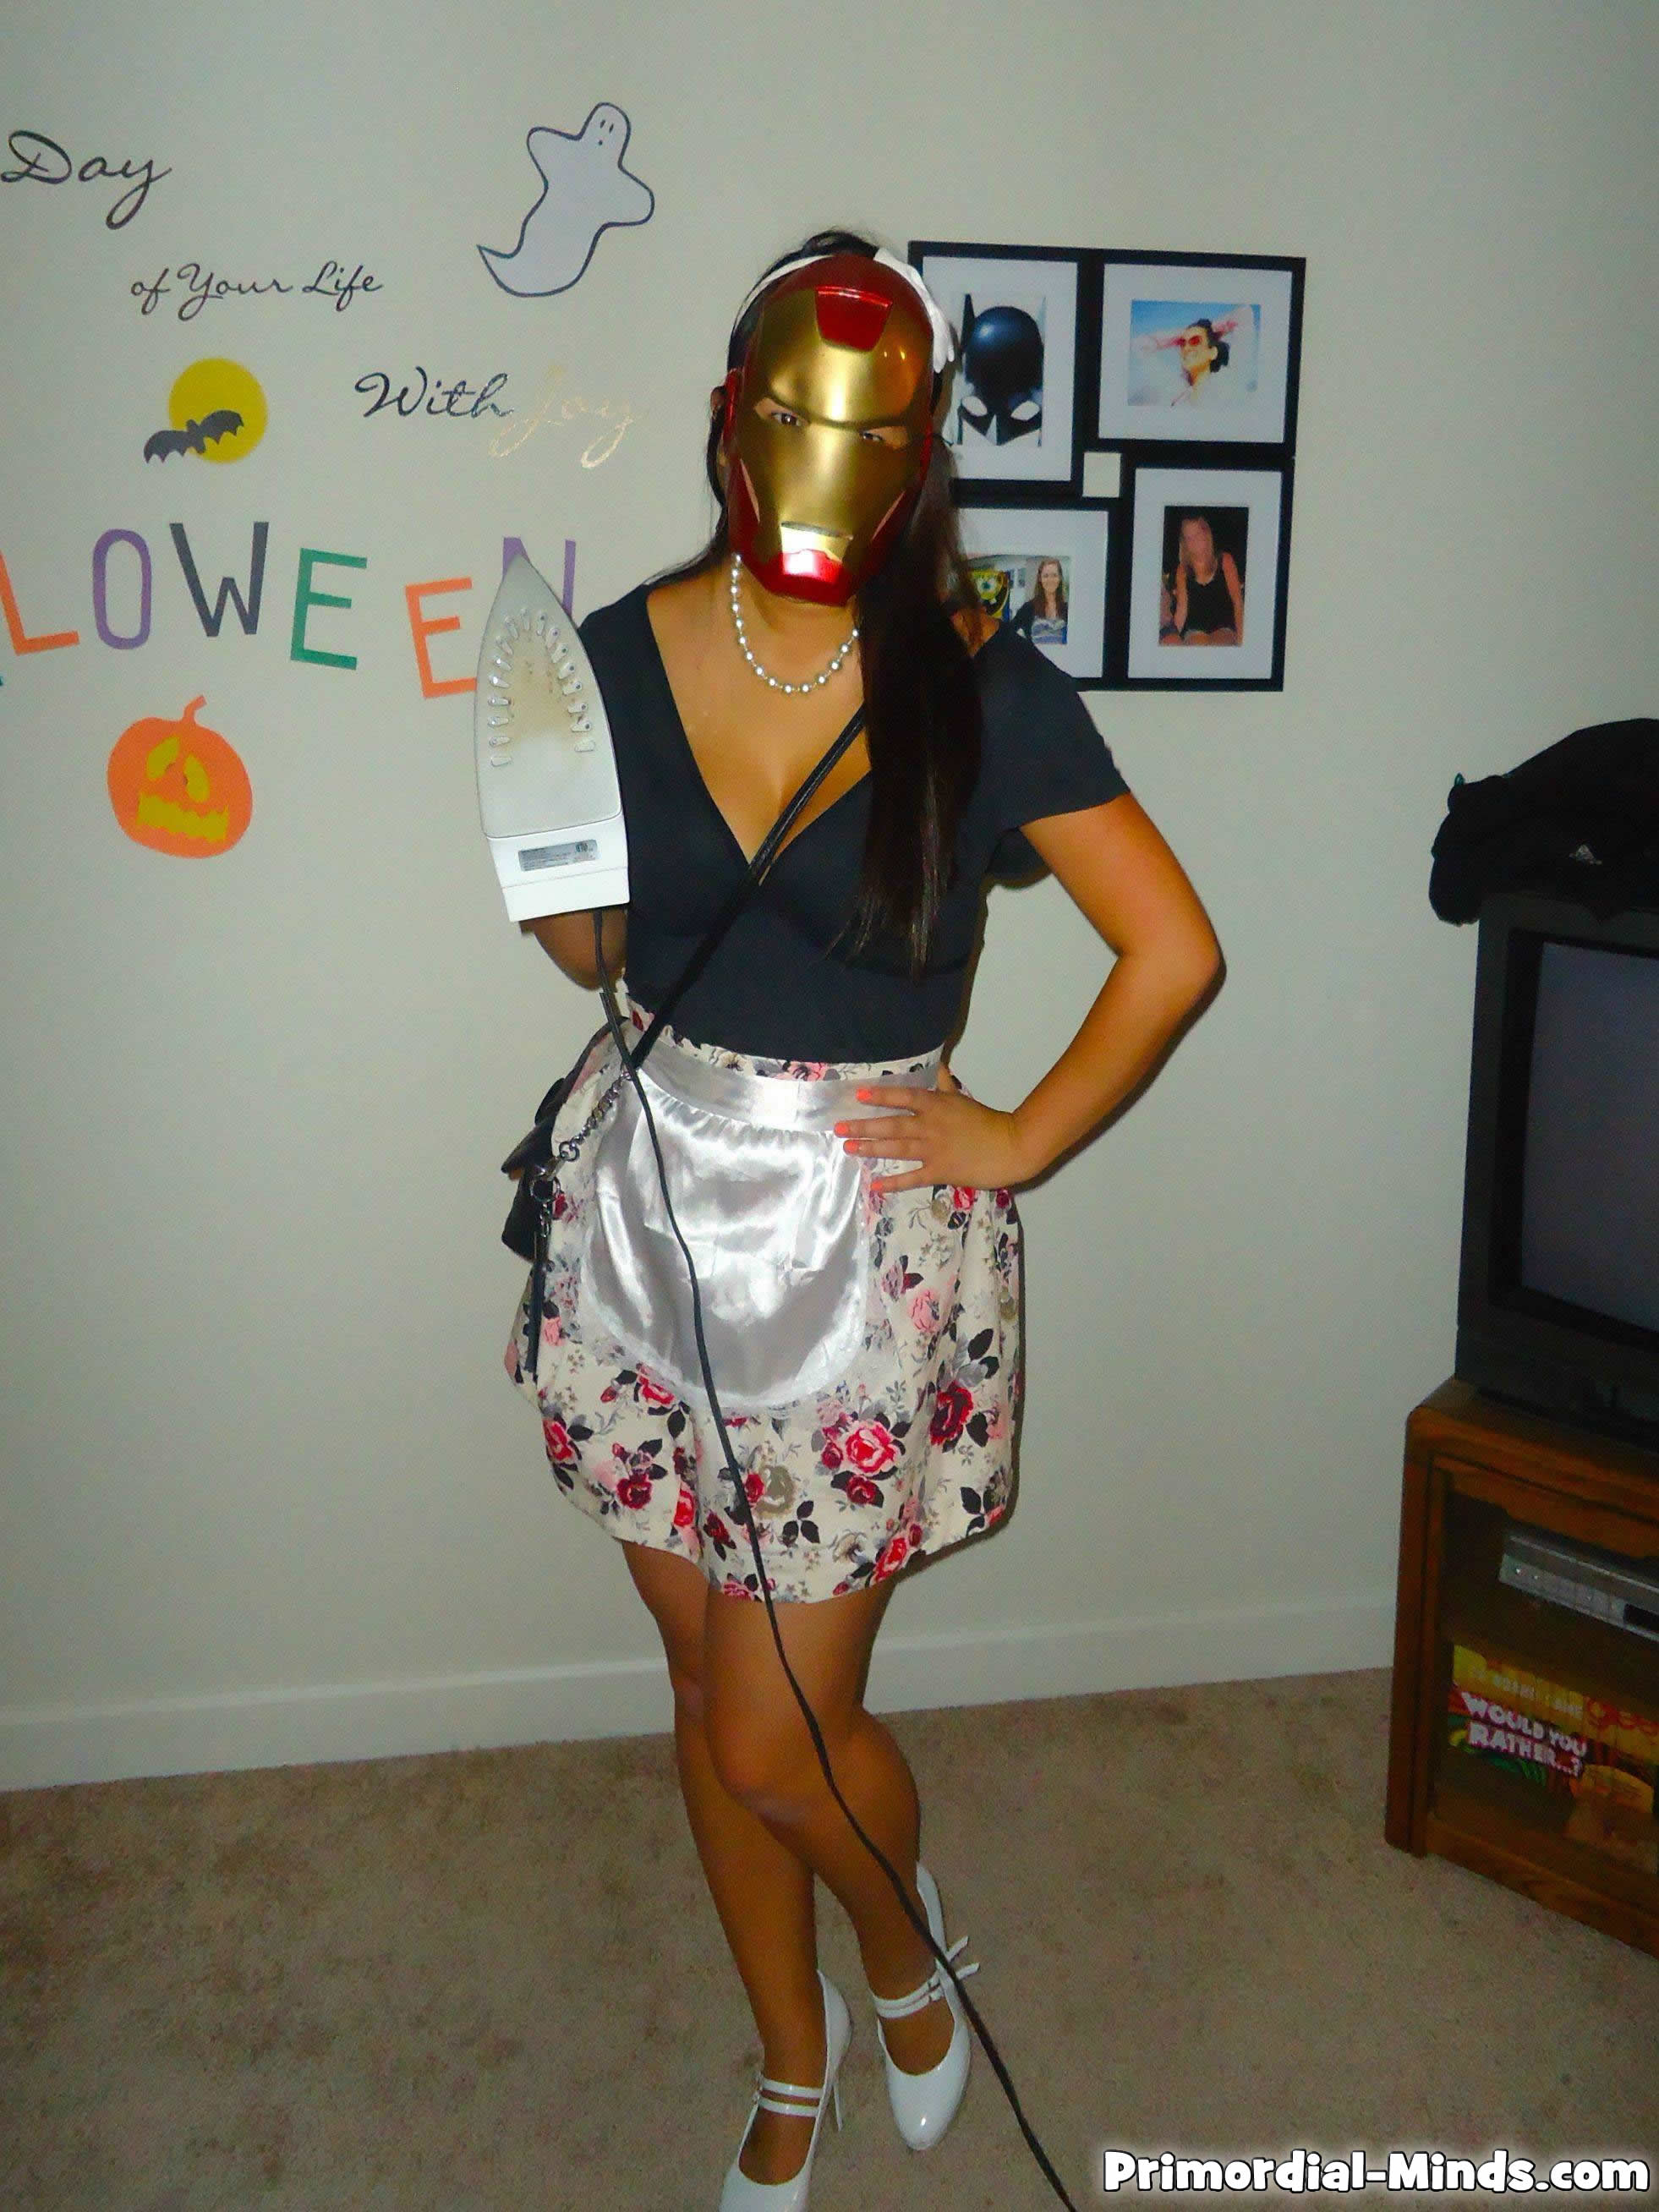 iron woman ironing - Day of Your Life are With Lloween See PrimordialMinds.com